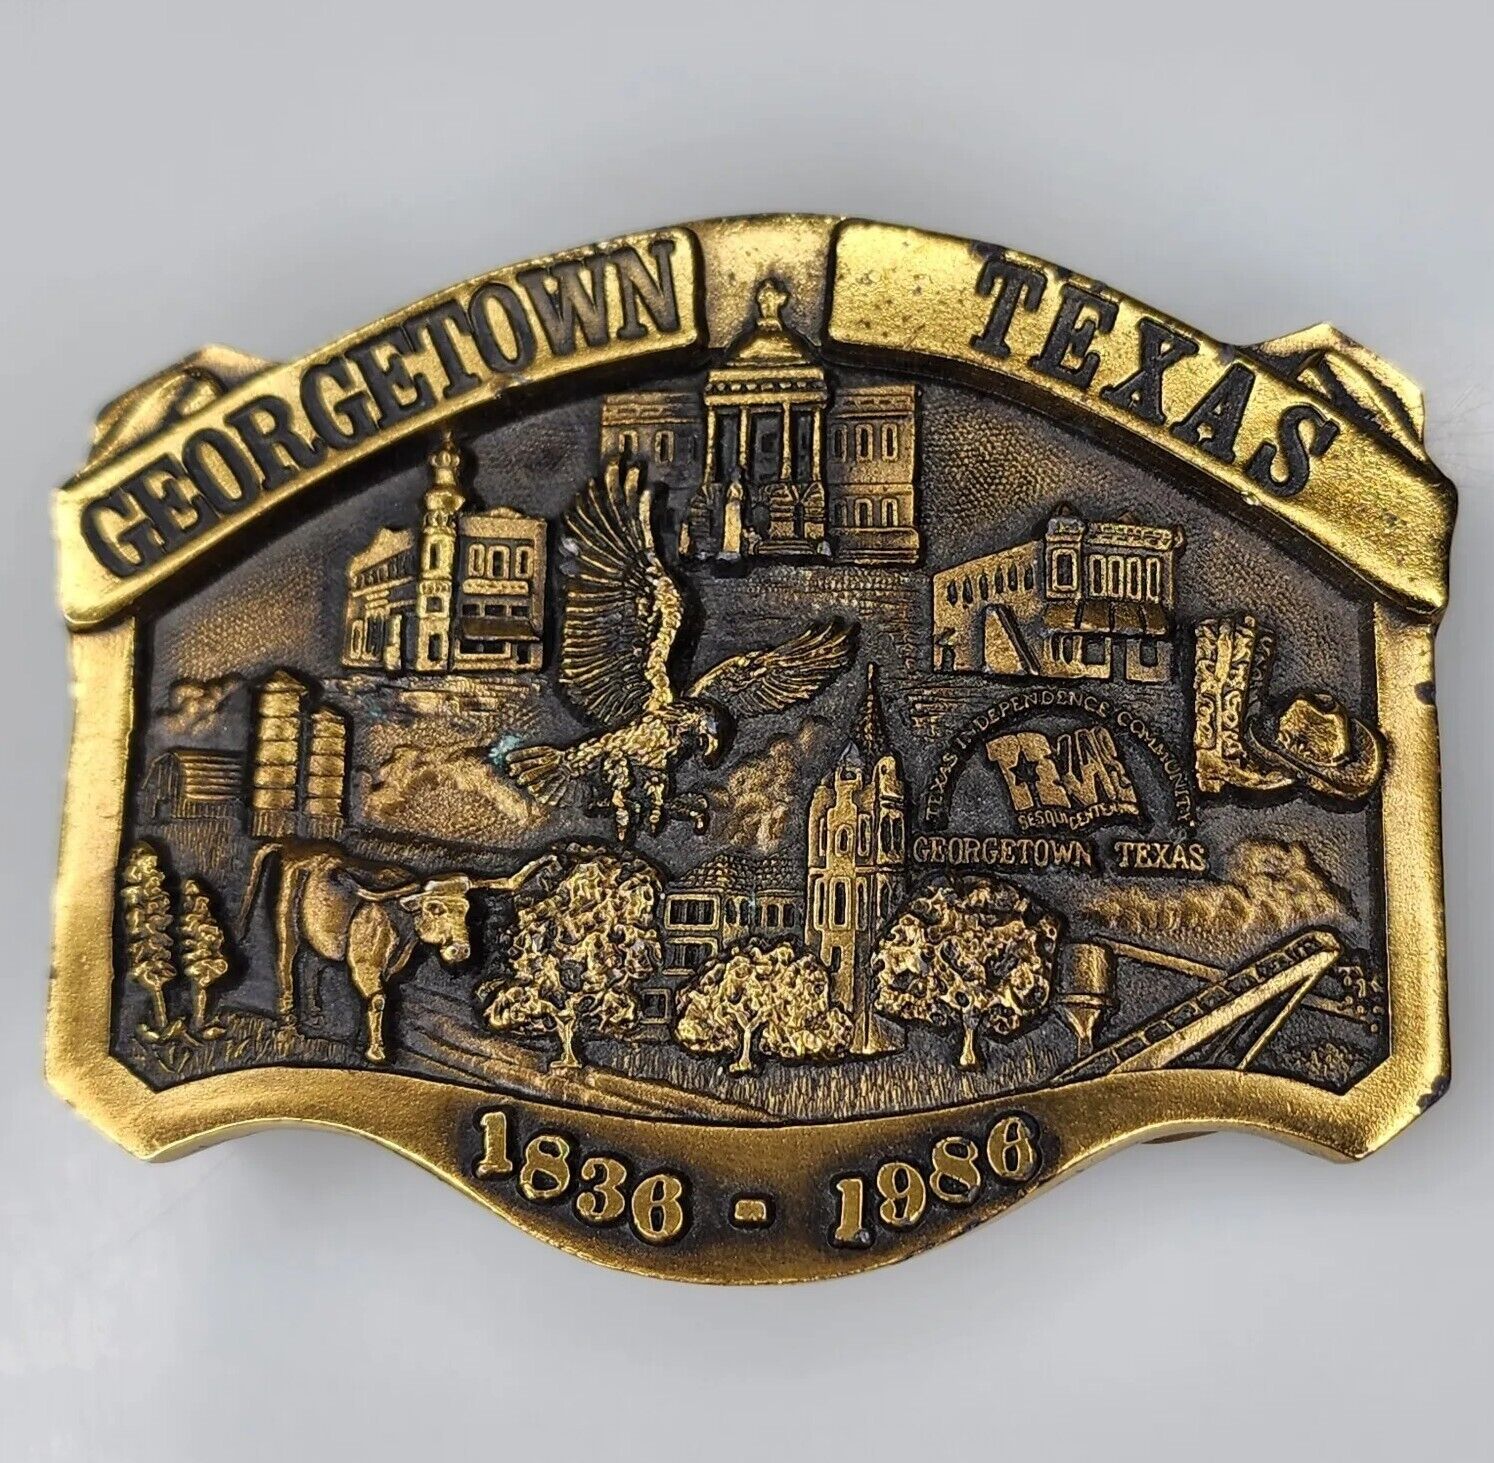 Vintage Georgetown Texas 1836-1986 Limited Edition Belt Buckle # 72/1000 RARE